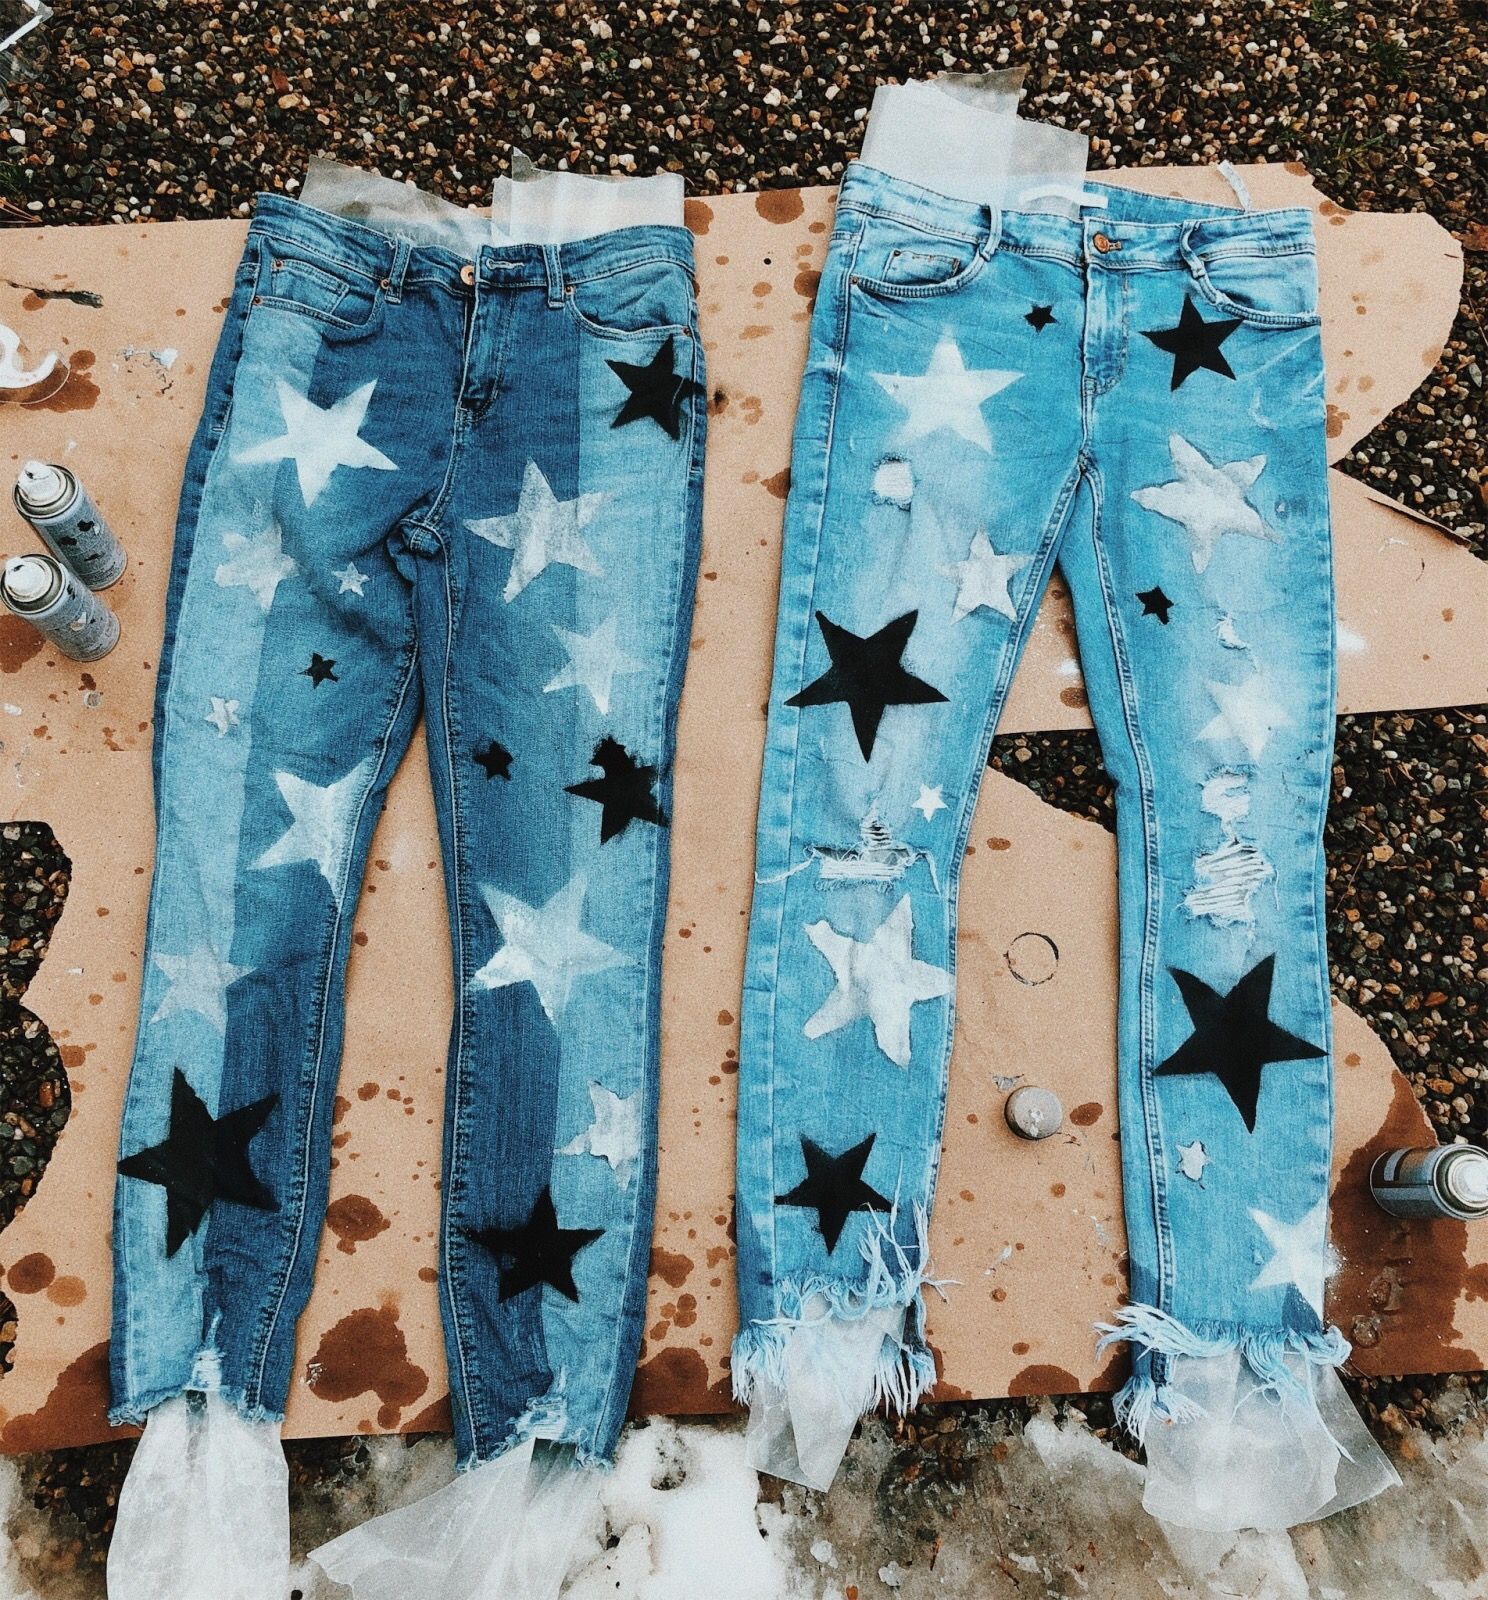 Star Jeans -   13 DIY Clothes Shoes outfit
 ideas